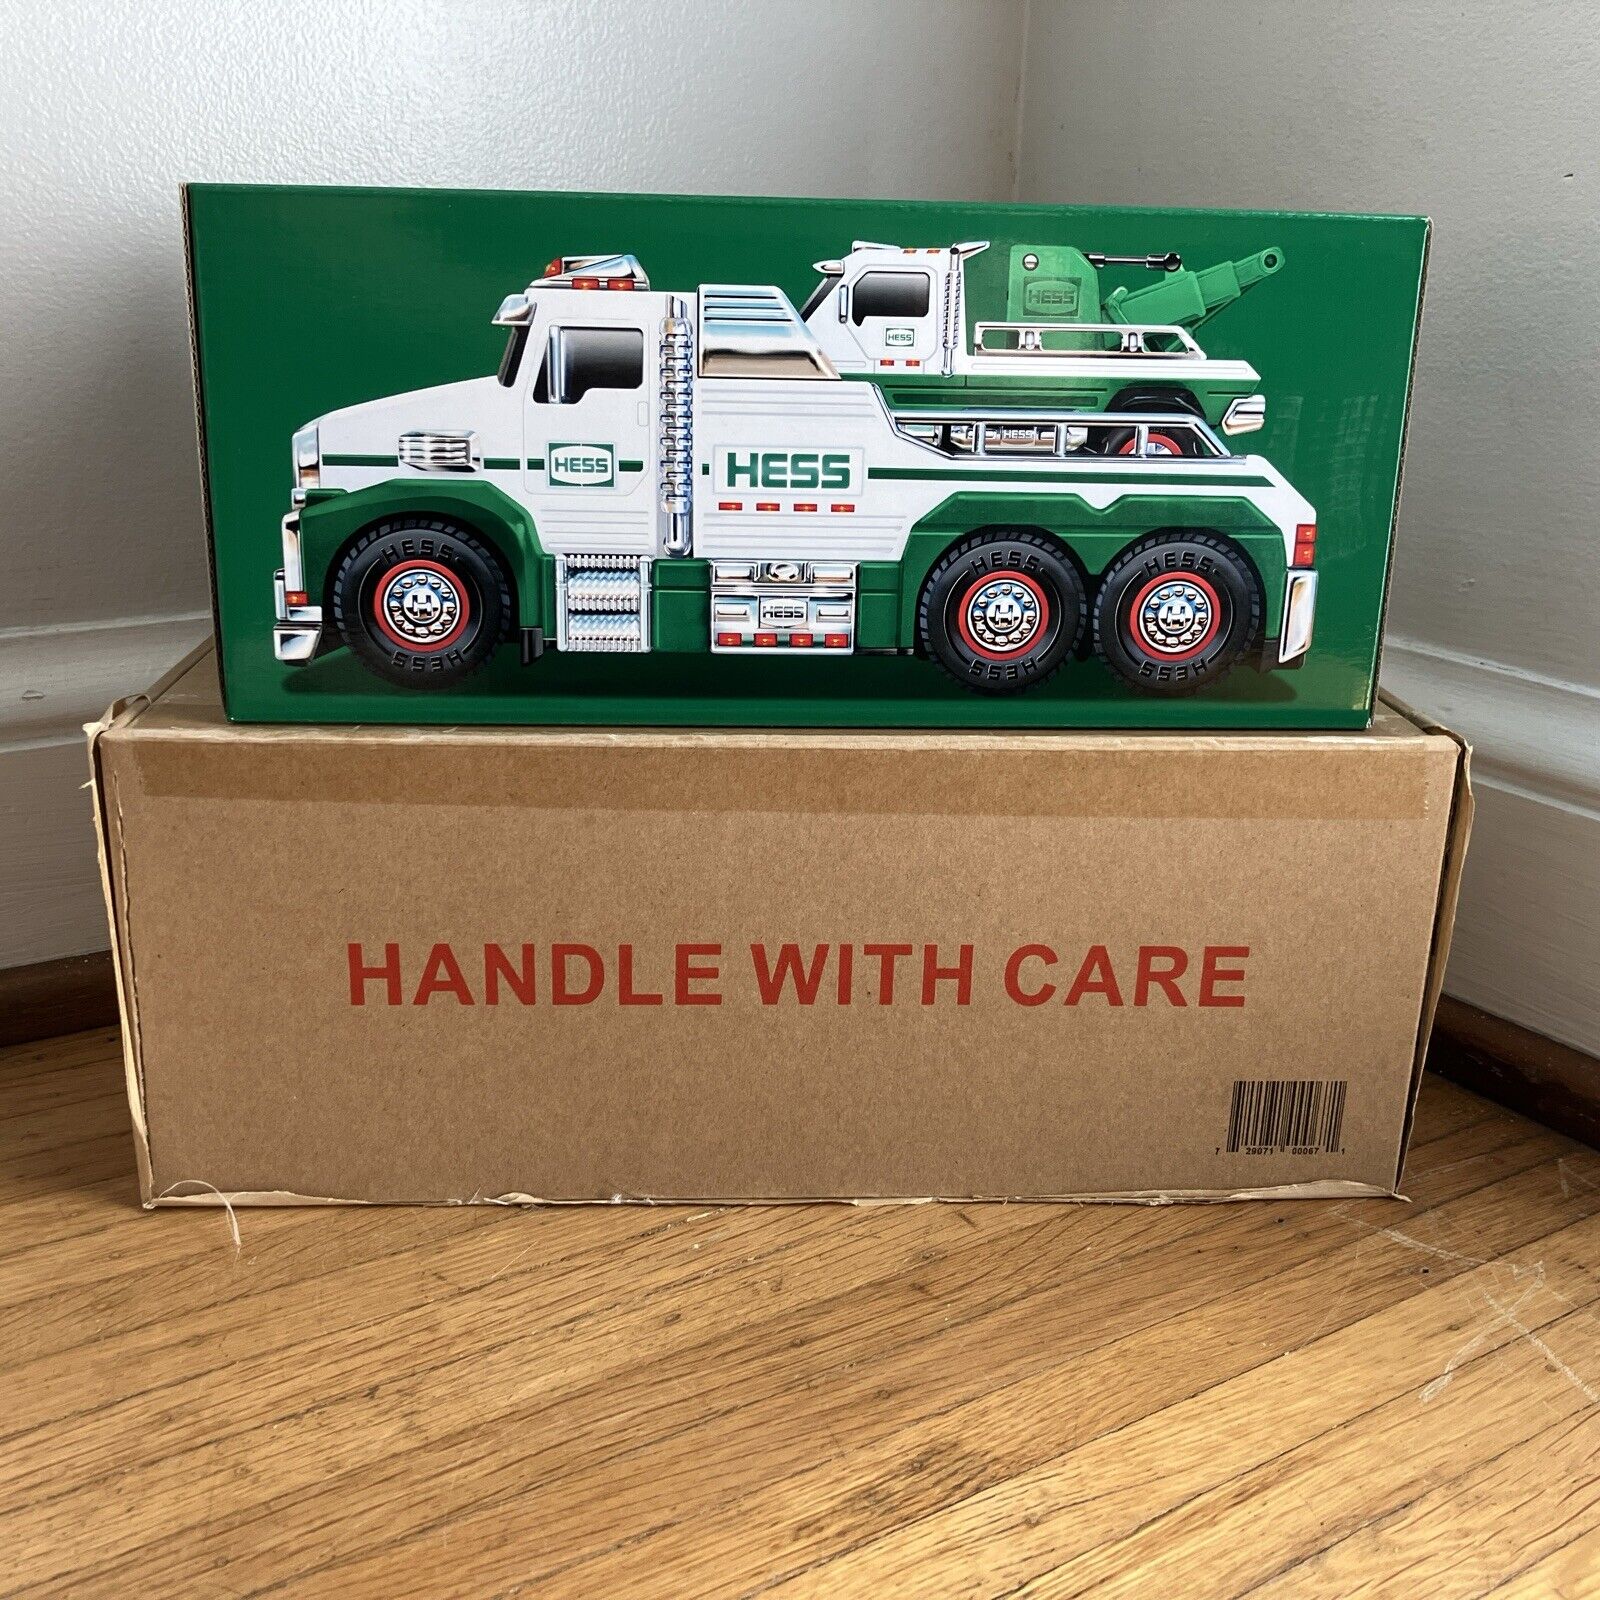 2019 Hess Tow Truck Rescue Rescue Team Large & Small Trucks w/Sound & Lights